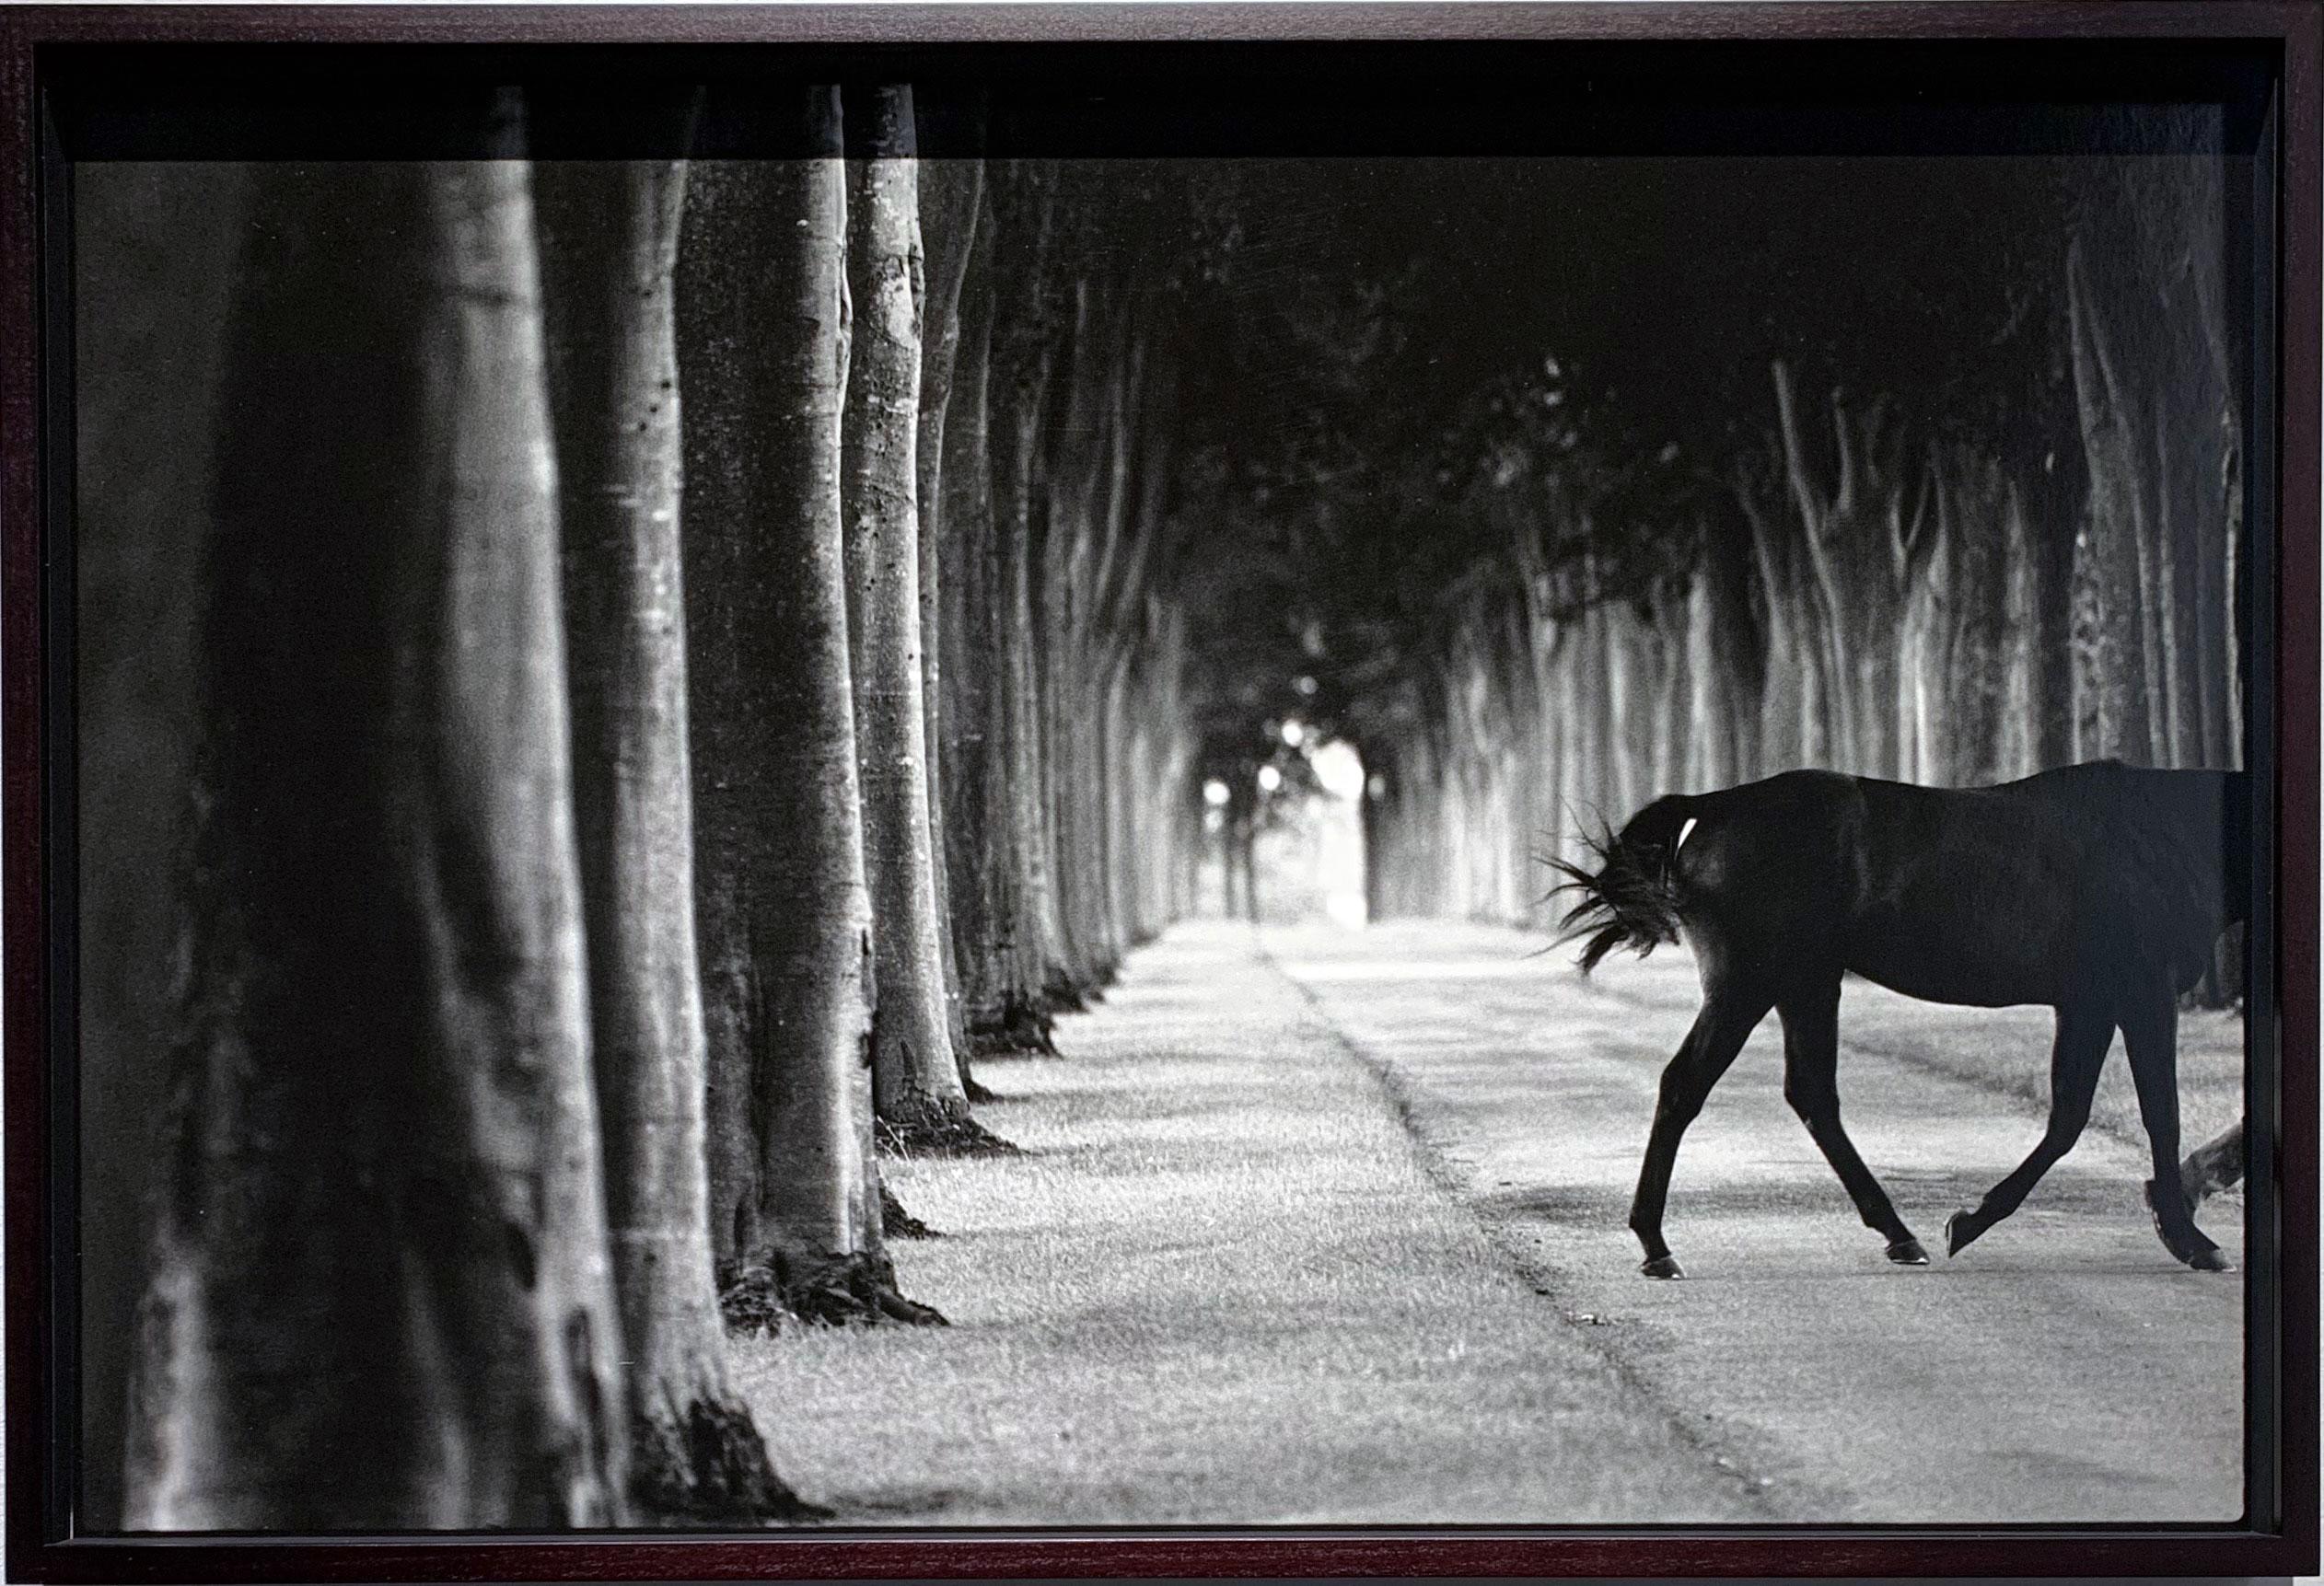 Kabool, ‘Avenue of Trees’, Horse Exit, Black and White landscape and a stallion - Photograph by John Reardon